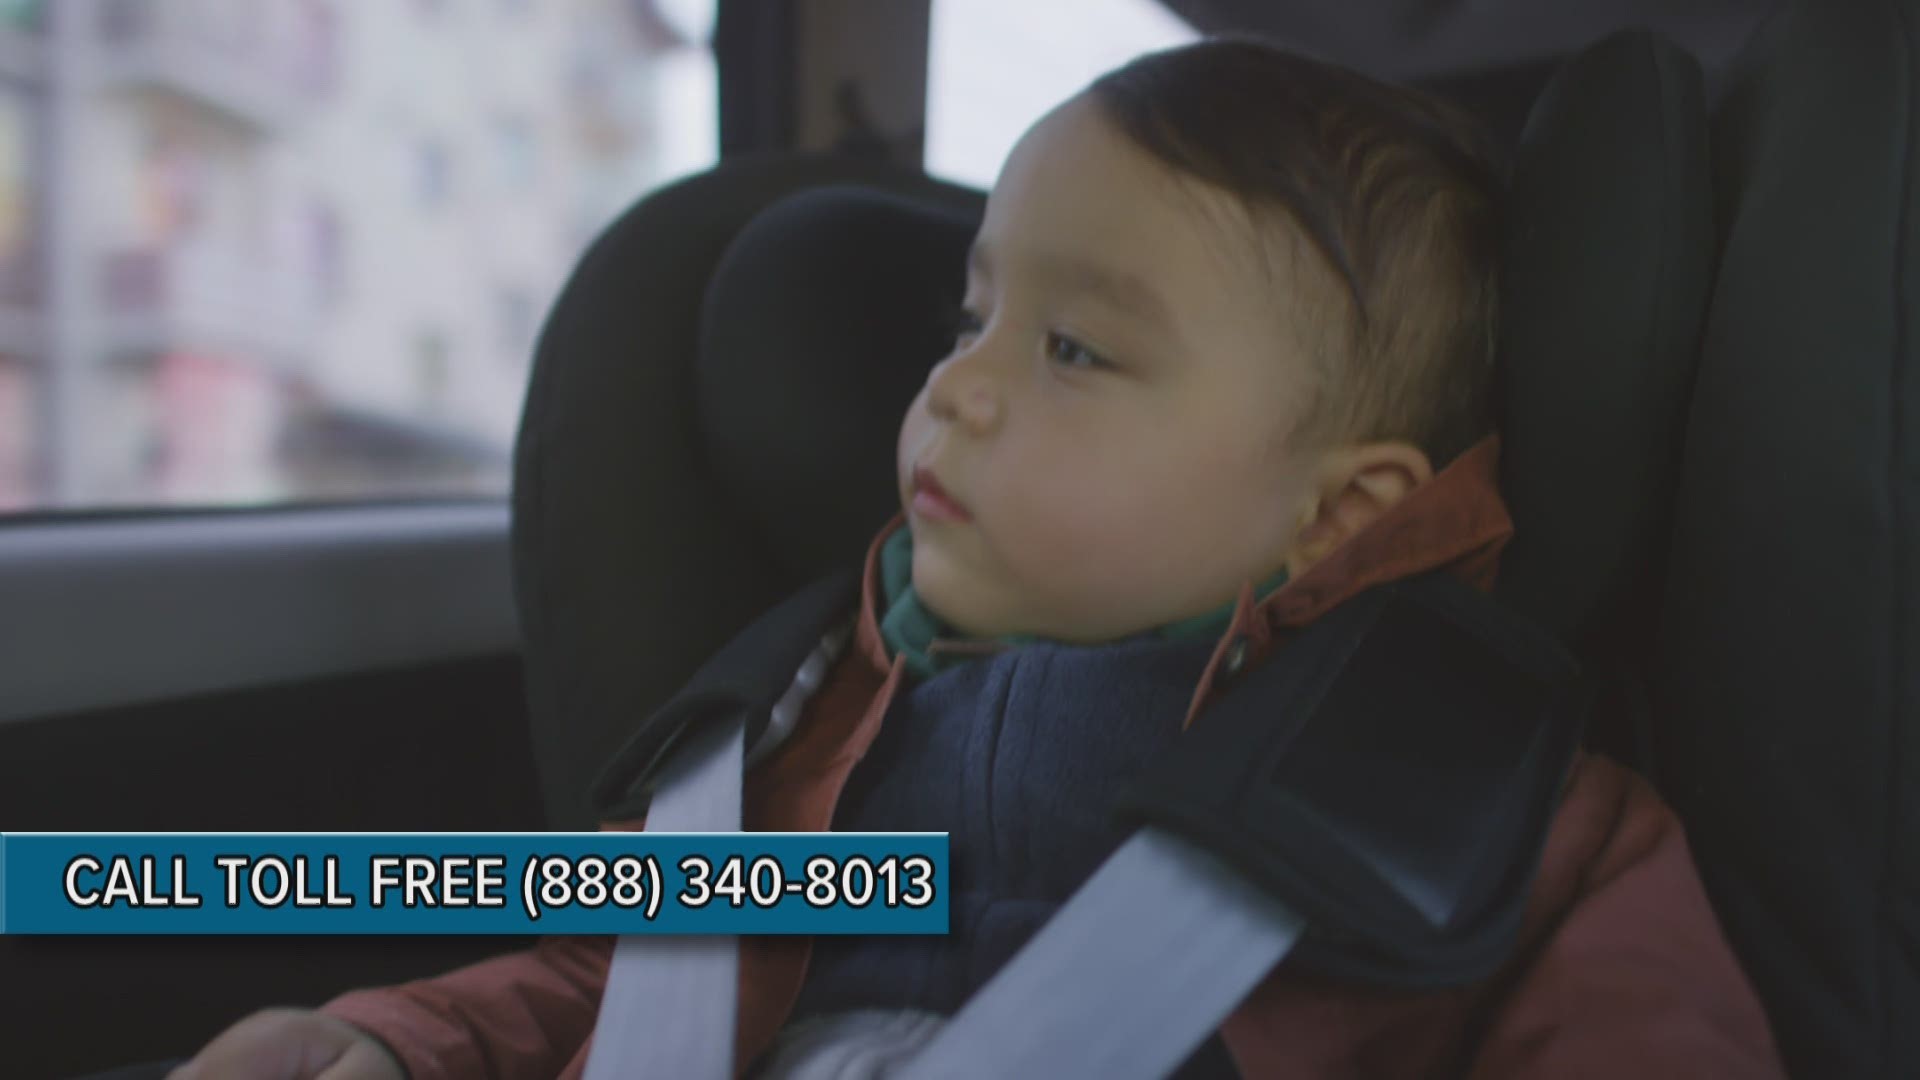 Safety first: take off your child’s winter coat before buckling her into her car seat